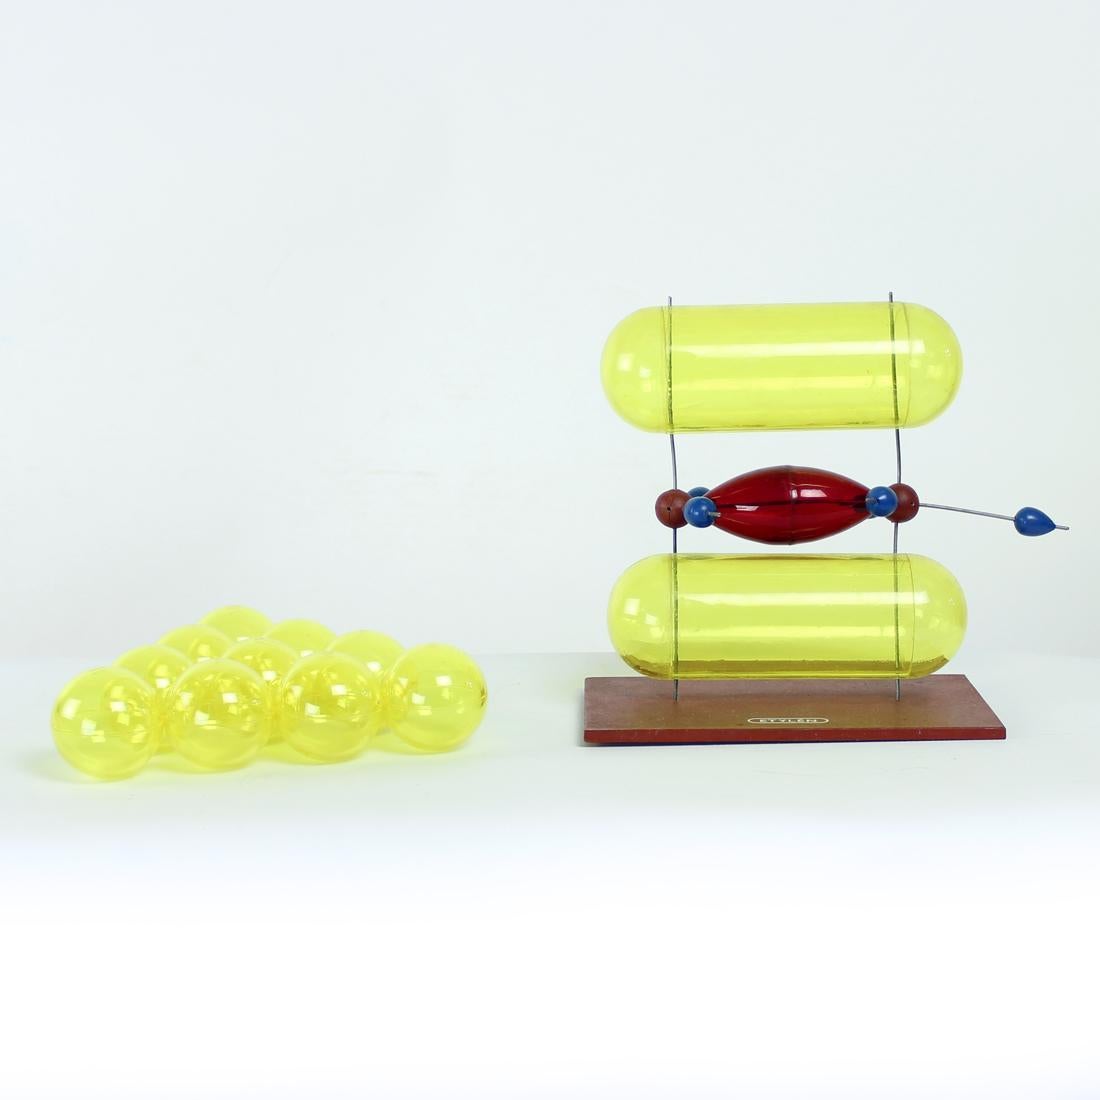 Original and unique home assessory, this is a school chemist model of ethylene. Produced and used in Czechoslovakia since 1960s, this model is made of plastic, with a plastic base. It is a stand alone piece, however we do have another piece, a